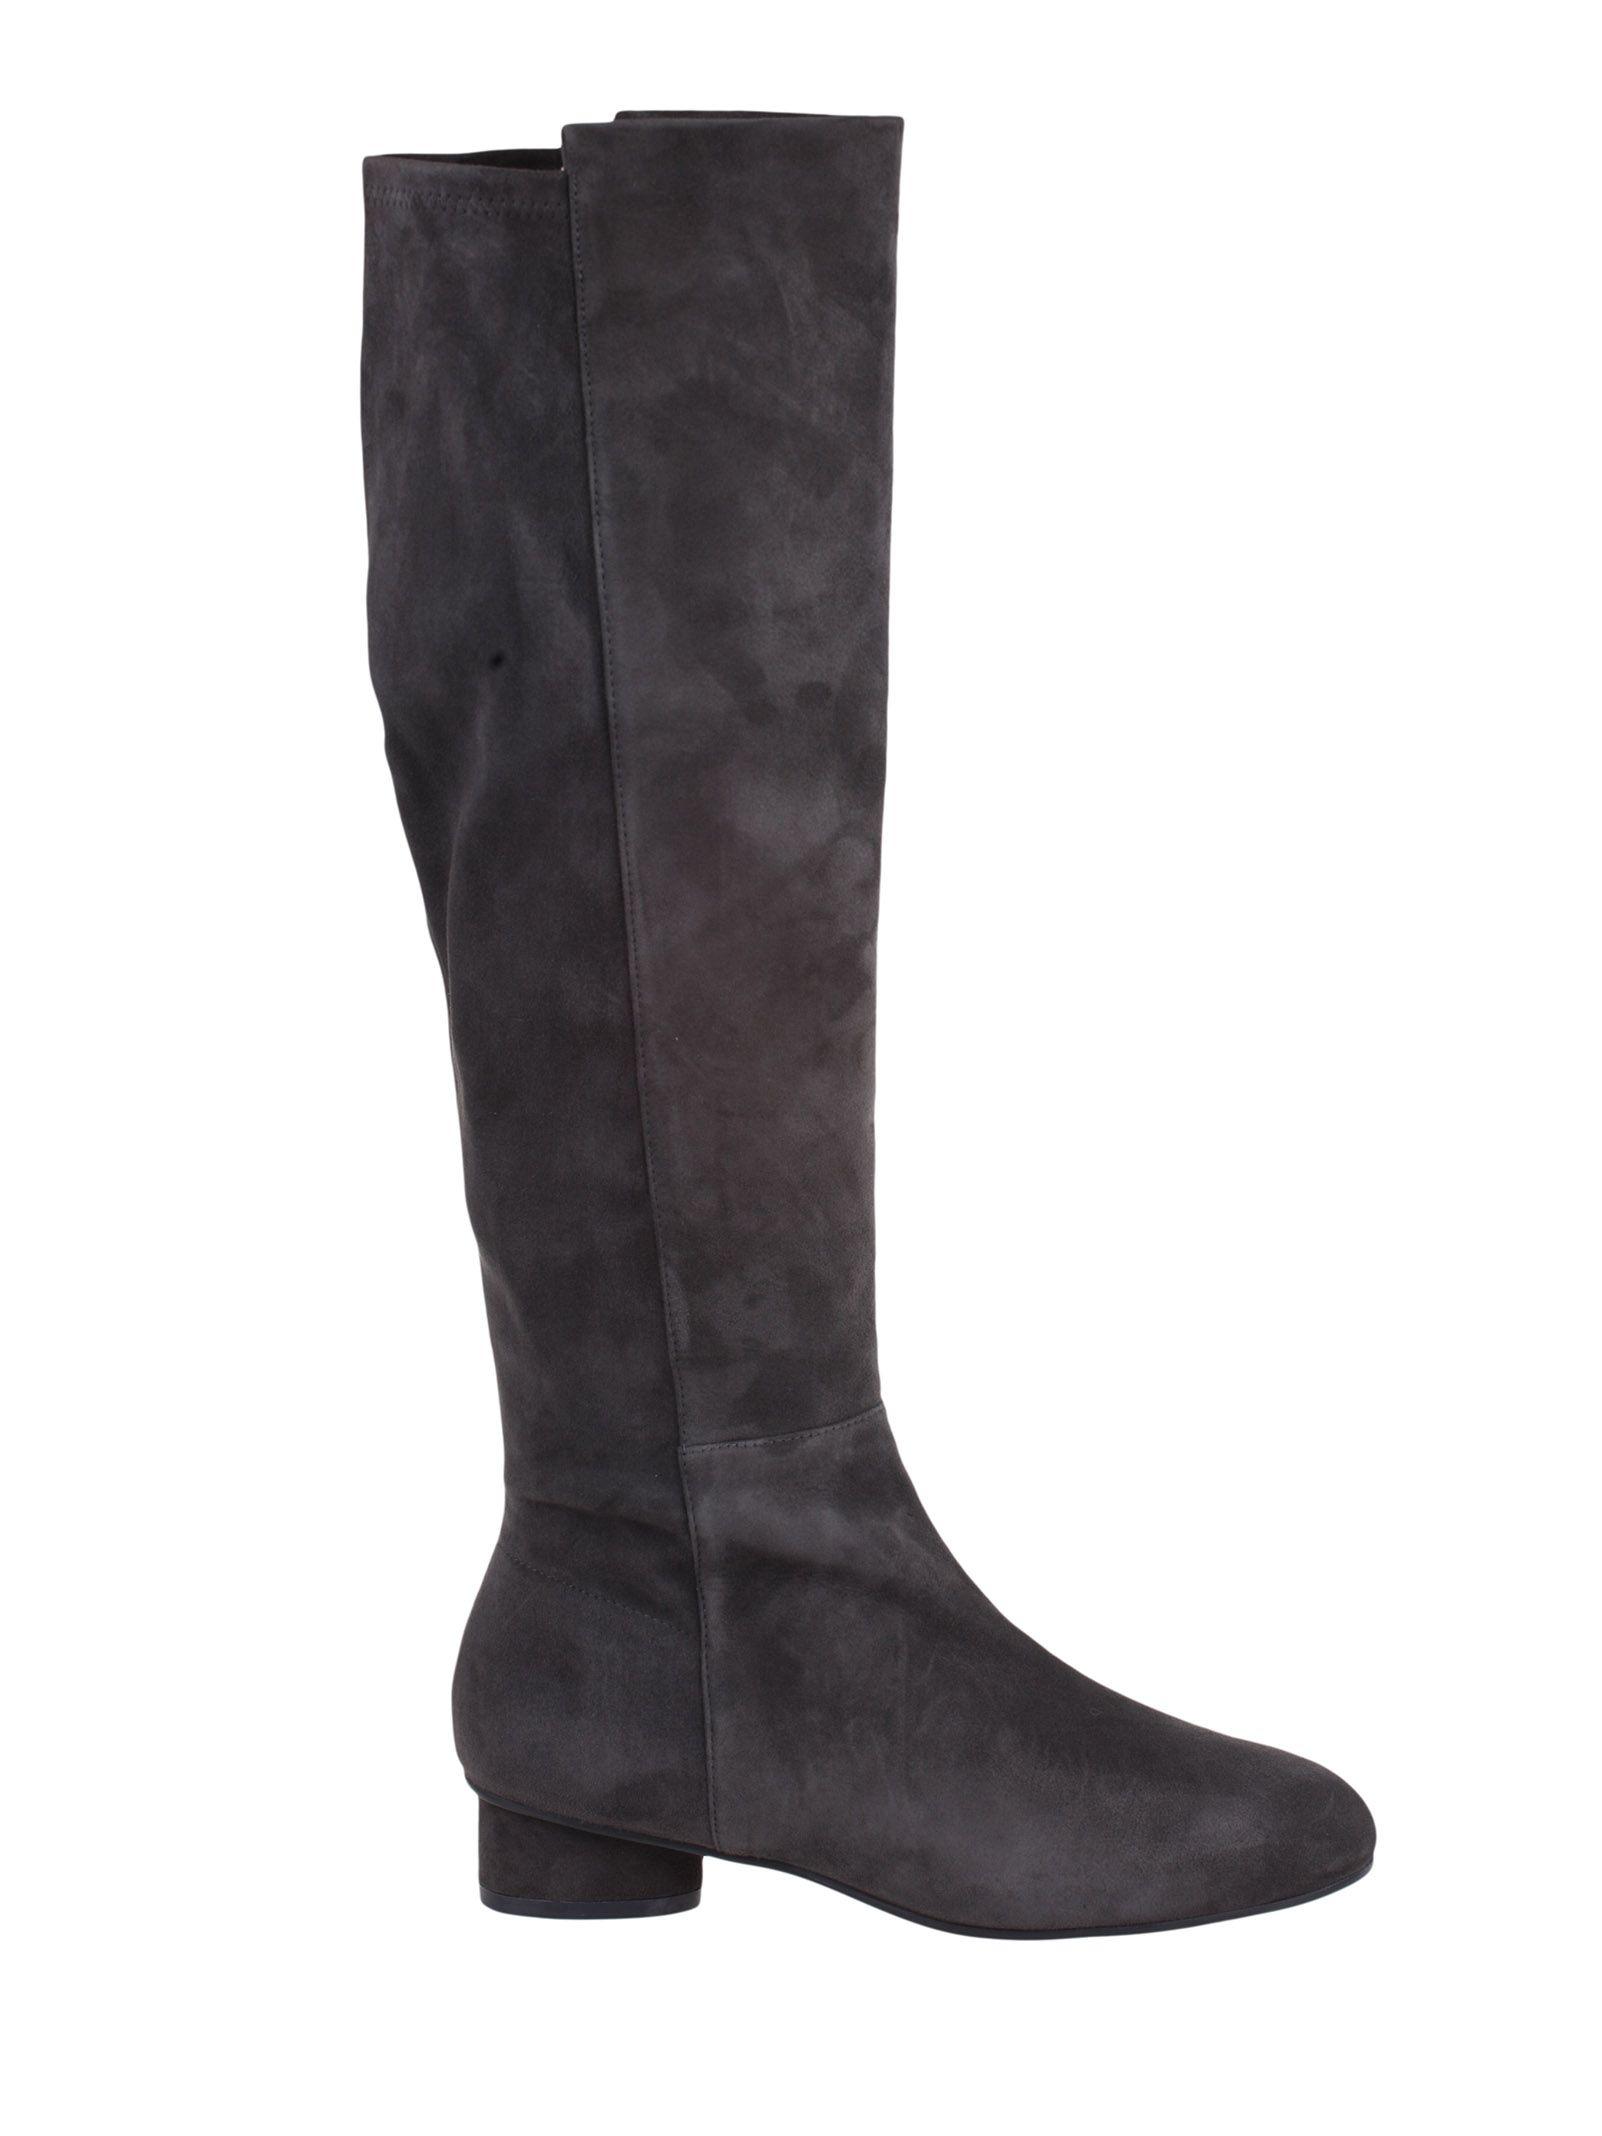 Stuart Weitzman Grey Leather Boots in Gray - Lyst